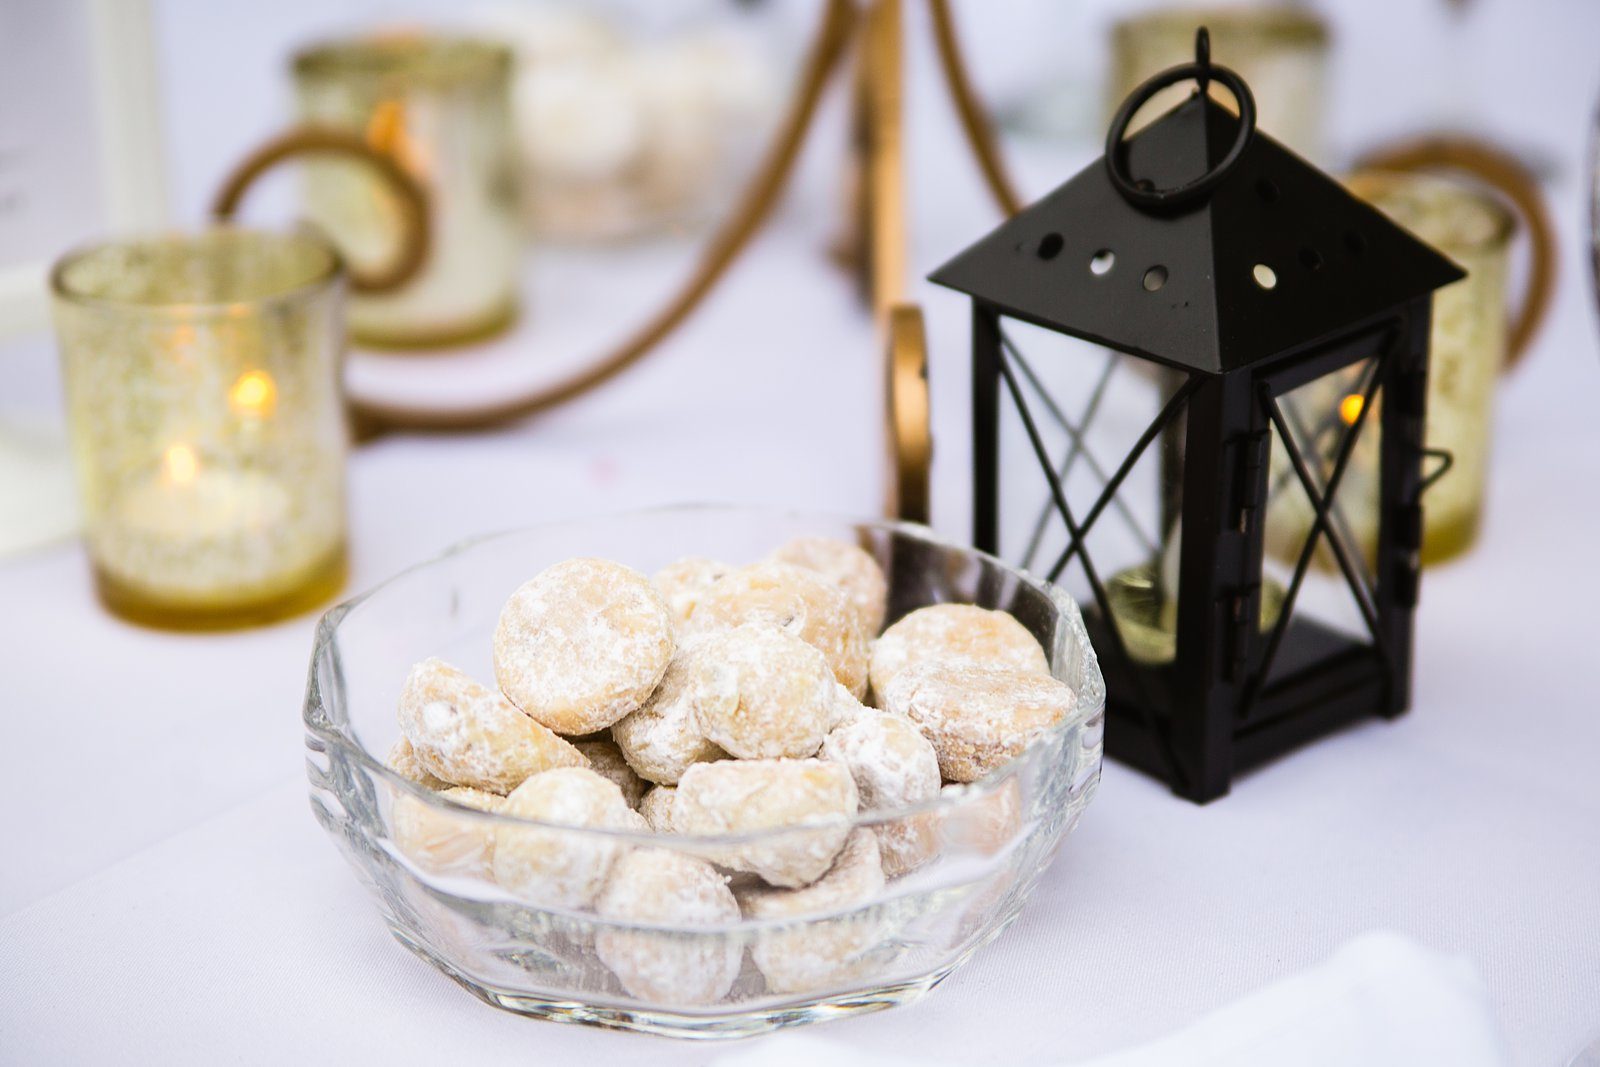 Mexican wedding cookies at wedding reception by PMA Photography.